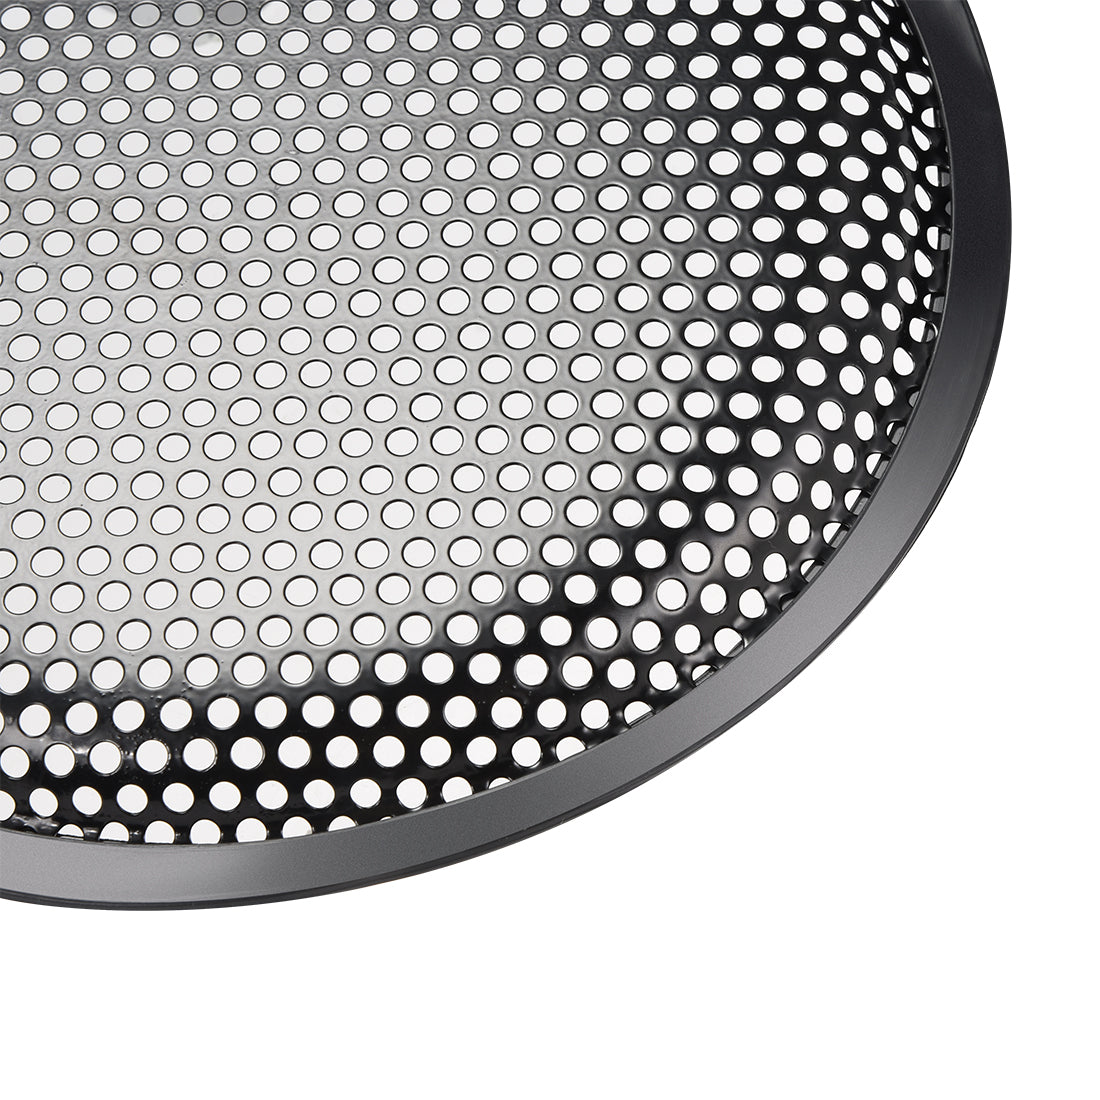 uxcell Uxcell 12" Speaker Waffle Grill Metal Mesh Audio Subwoofer Guard Protector Cover with Clips,Screws